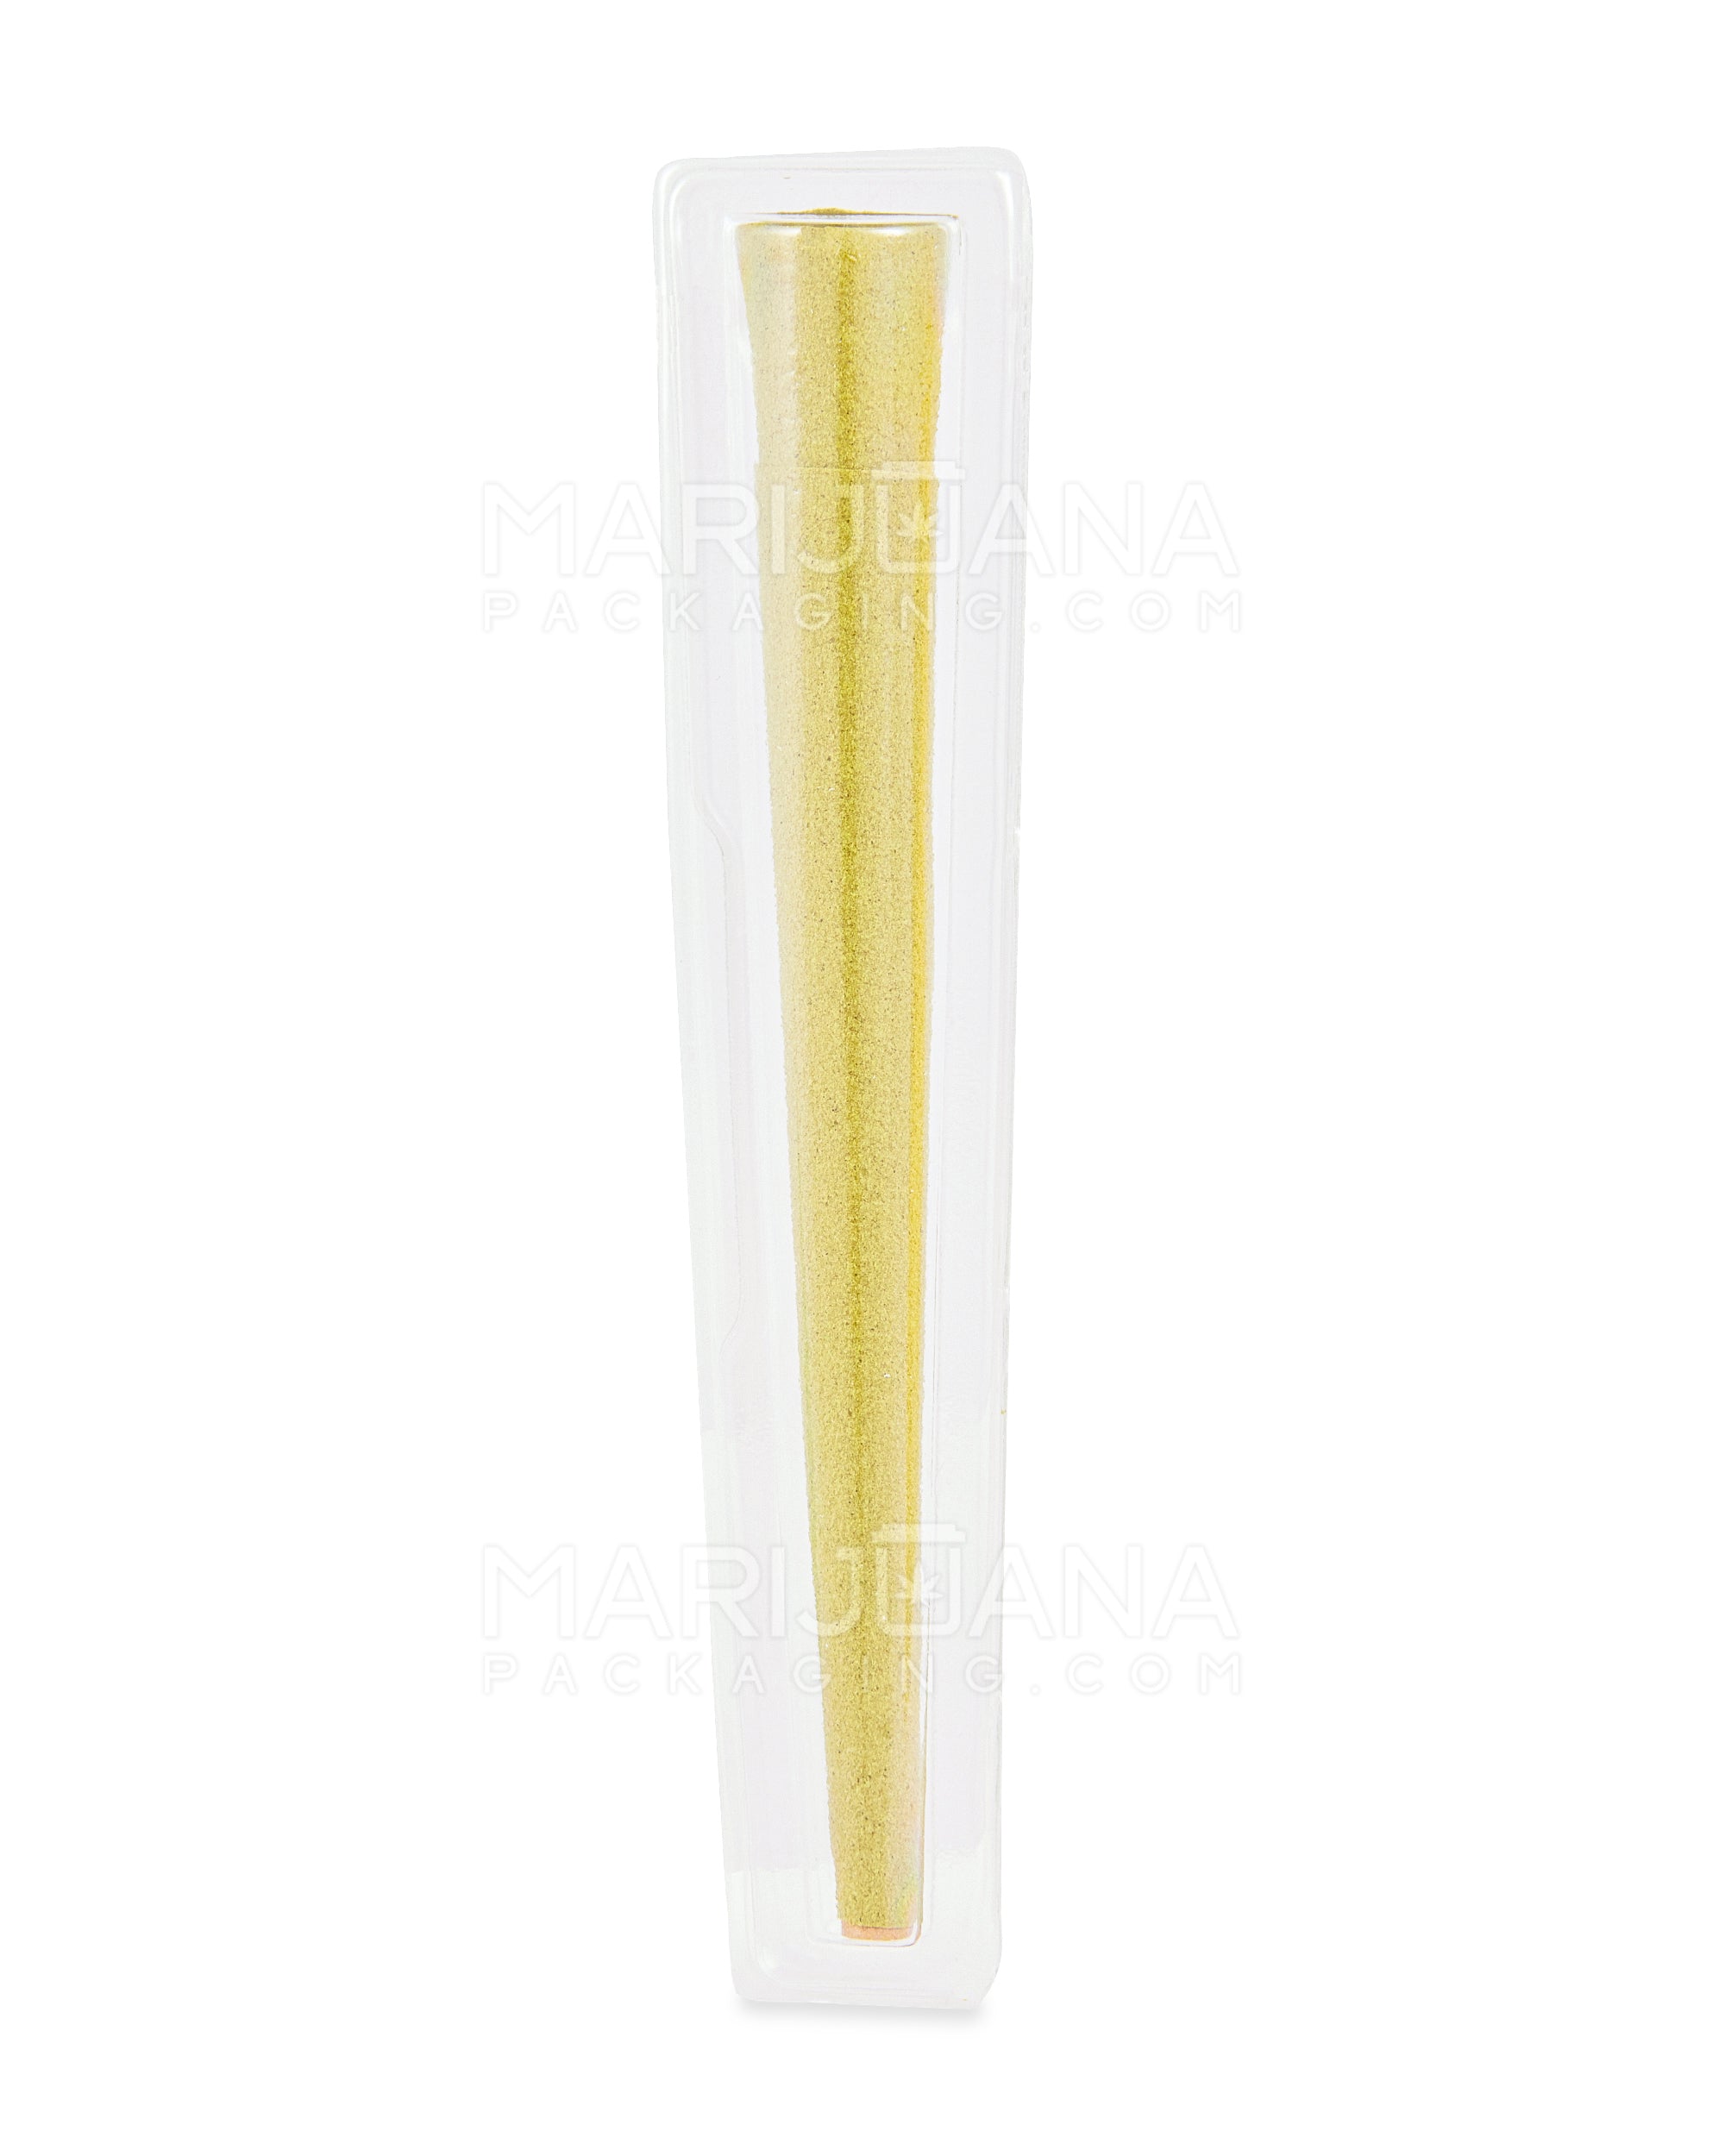 KUSH | 'Retail Display' Pre Rolled Herbal Conical Wraps | 157mm - Lemonade - 15 Count - 5